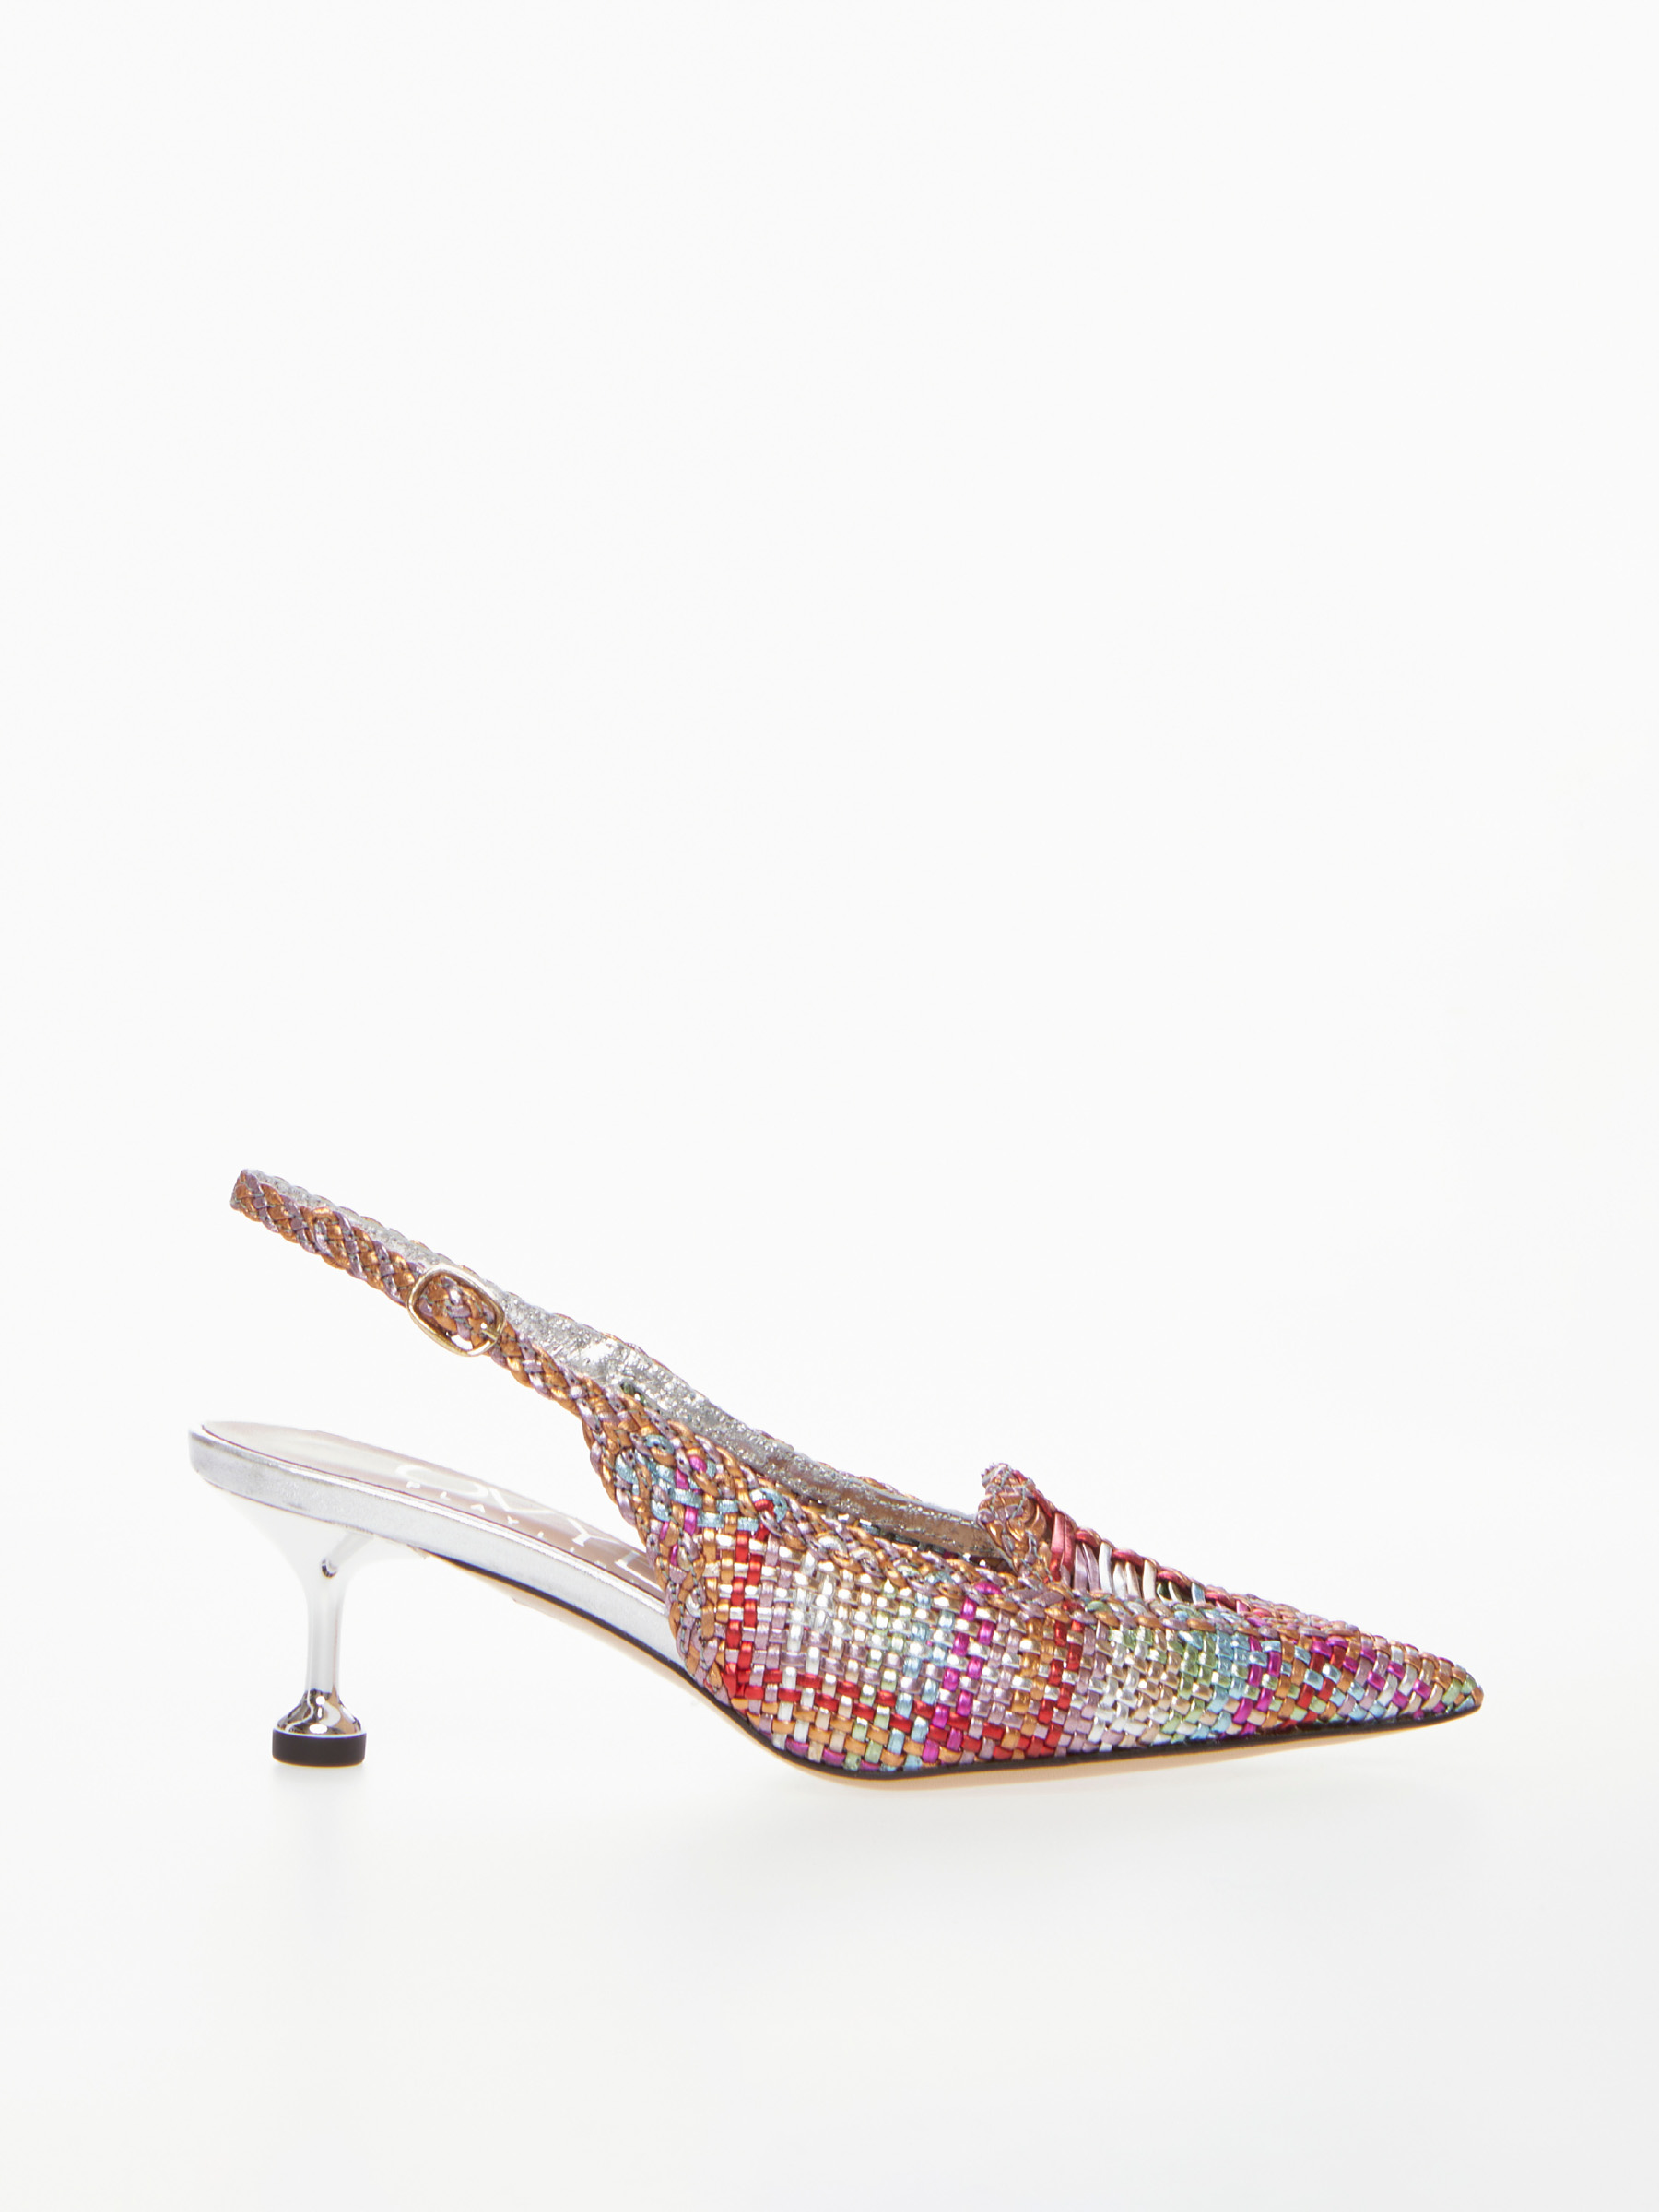 Woven Leather Slingback Marisol